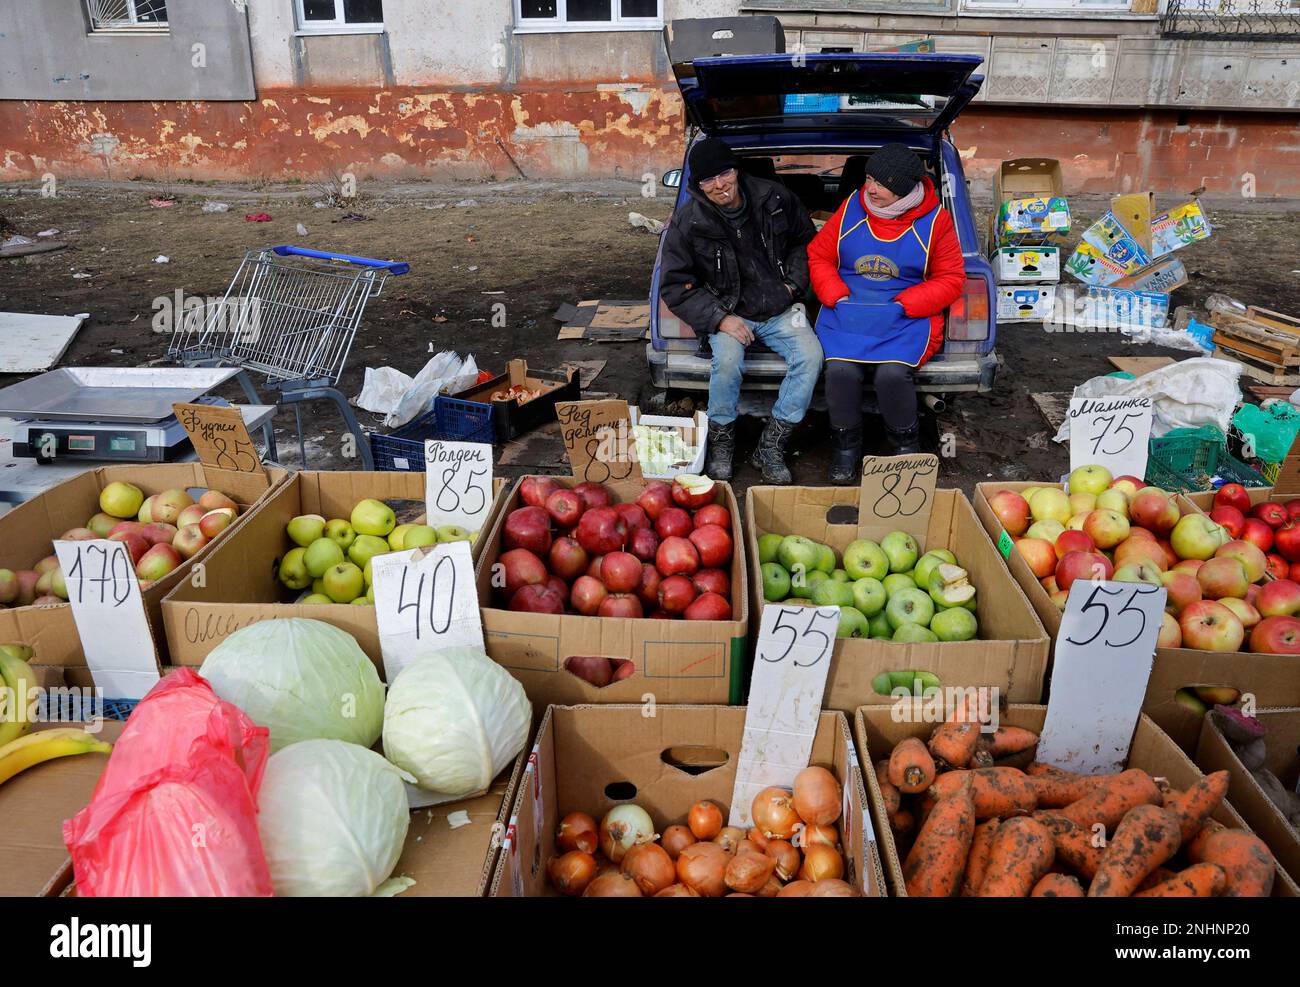 Vendors sell fruits and vegetables at a local market in the course of Russia-Ukraine conflict in Mariupol, Russian-controlled Ukraine, February 16, 2023. REUTERS/Alexander Ermochenko Stock Photo